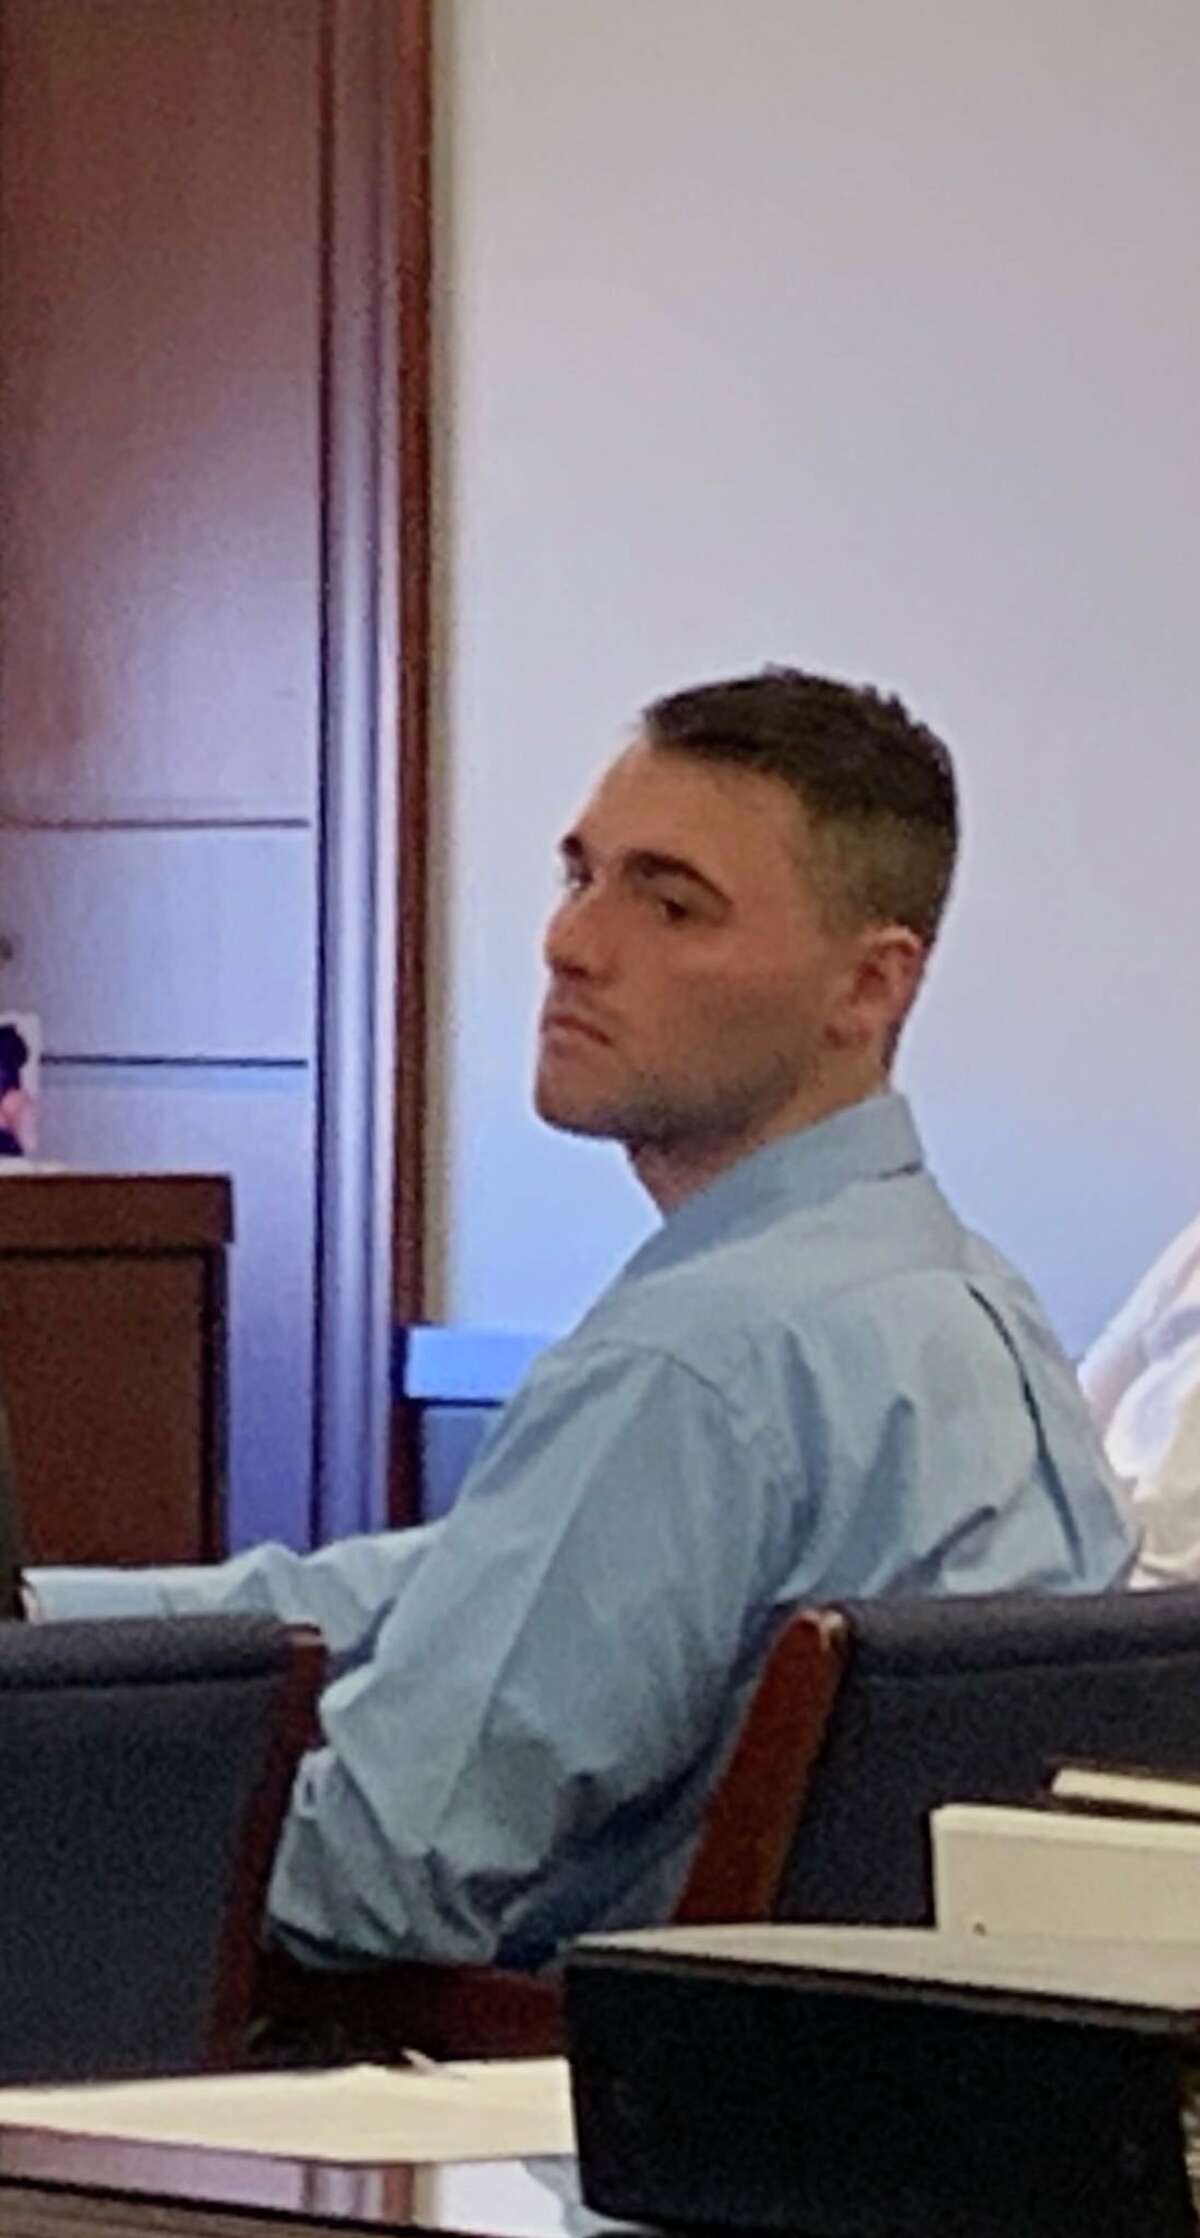 Thomas Slivienski, 23, looks on Thursday as opening arguments are held at his trial in state Supreme Court in Albany where he is accused of killing a teenager who stole his marijuana.